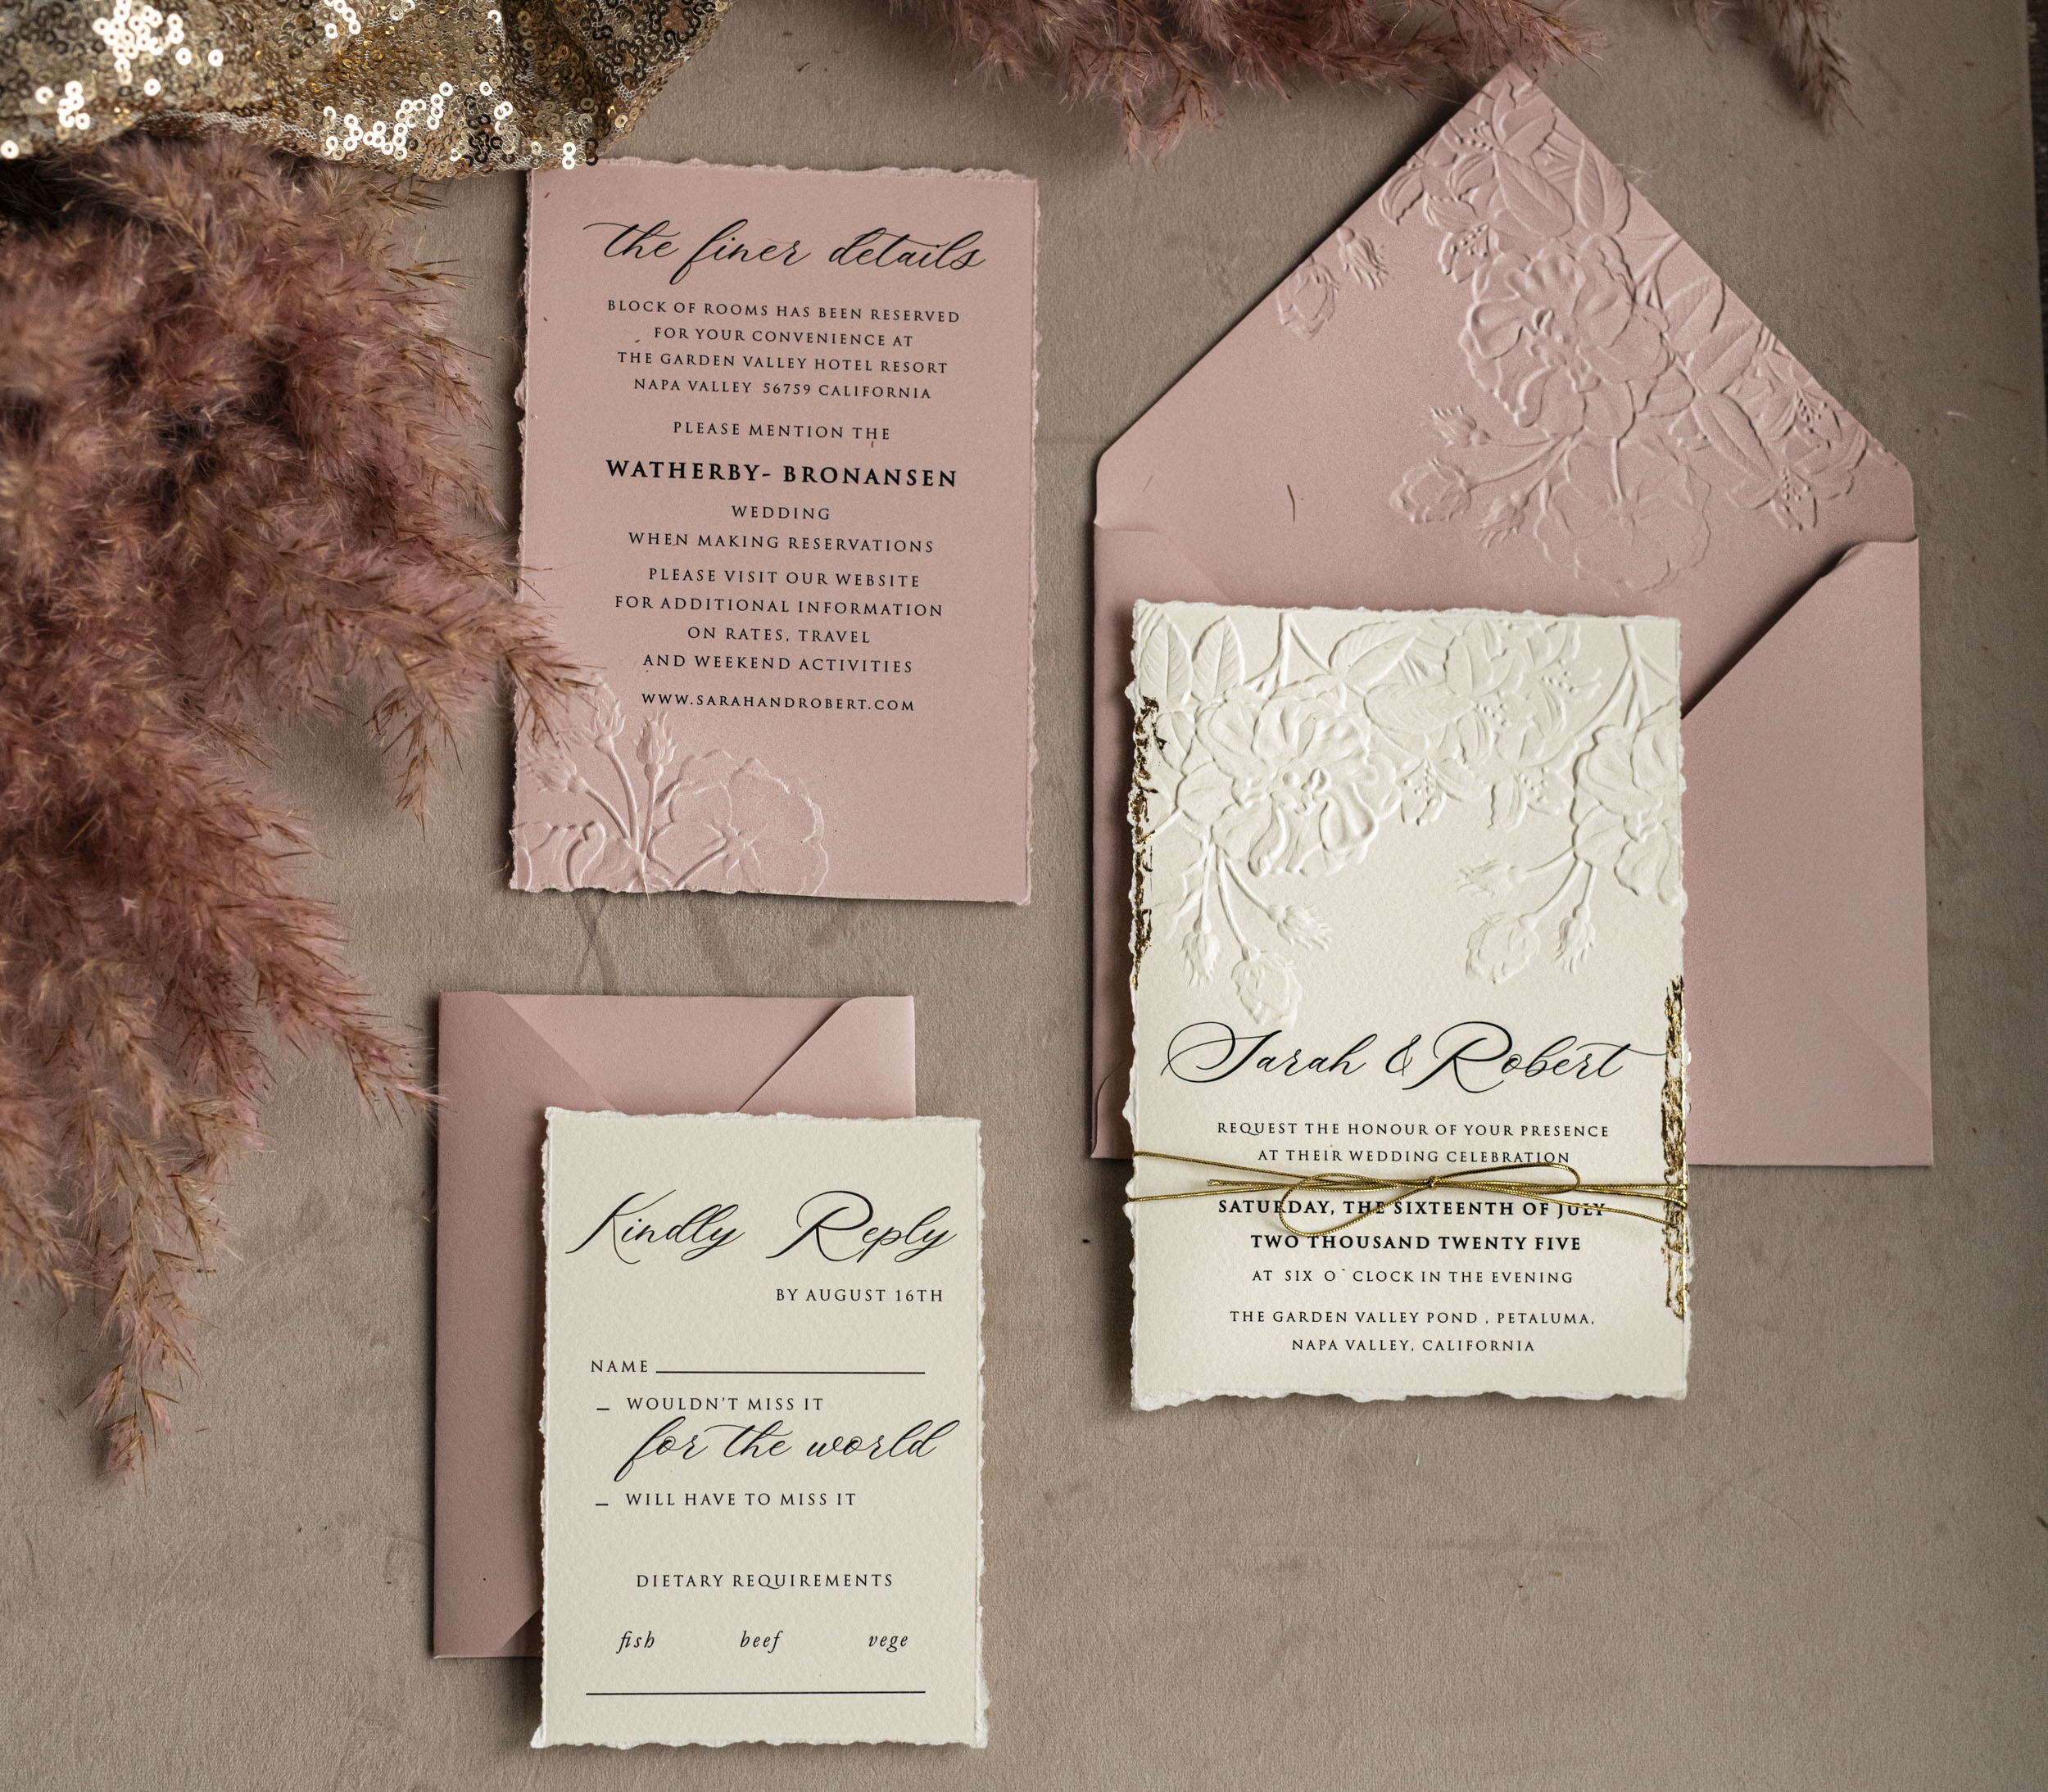 Essentials for a Picturesque, Dreamy, and Elegant Wedding Celebration: Blush Pink Florals and Gold Color Scheme